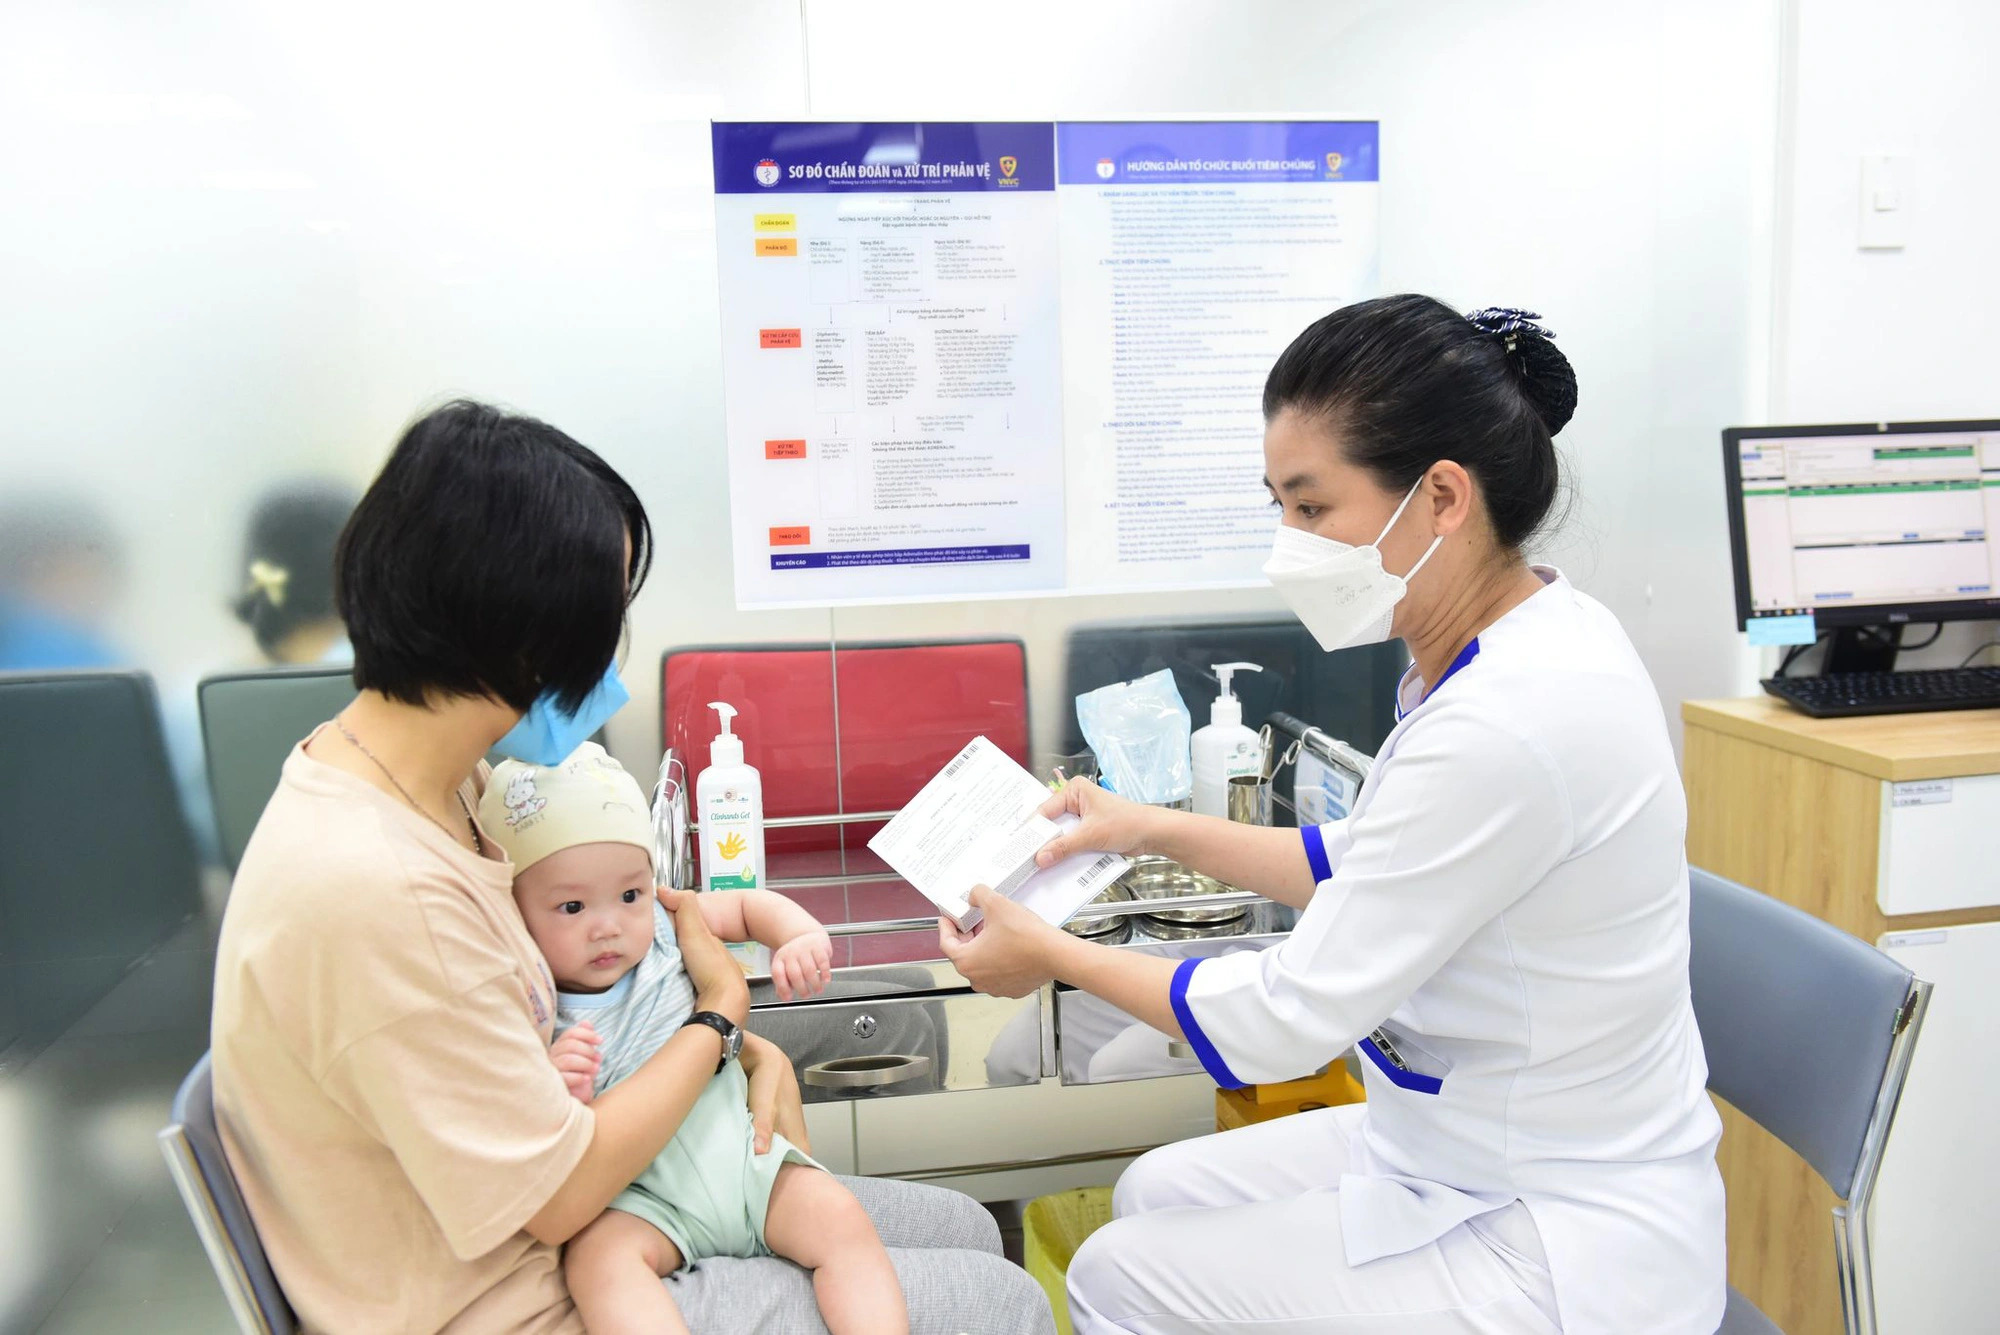 Ho Chi Minh City runs out of 6 types of vaccine, including 5-in-1